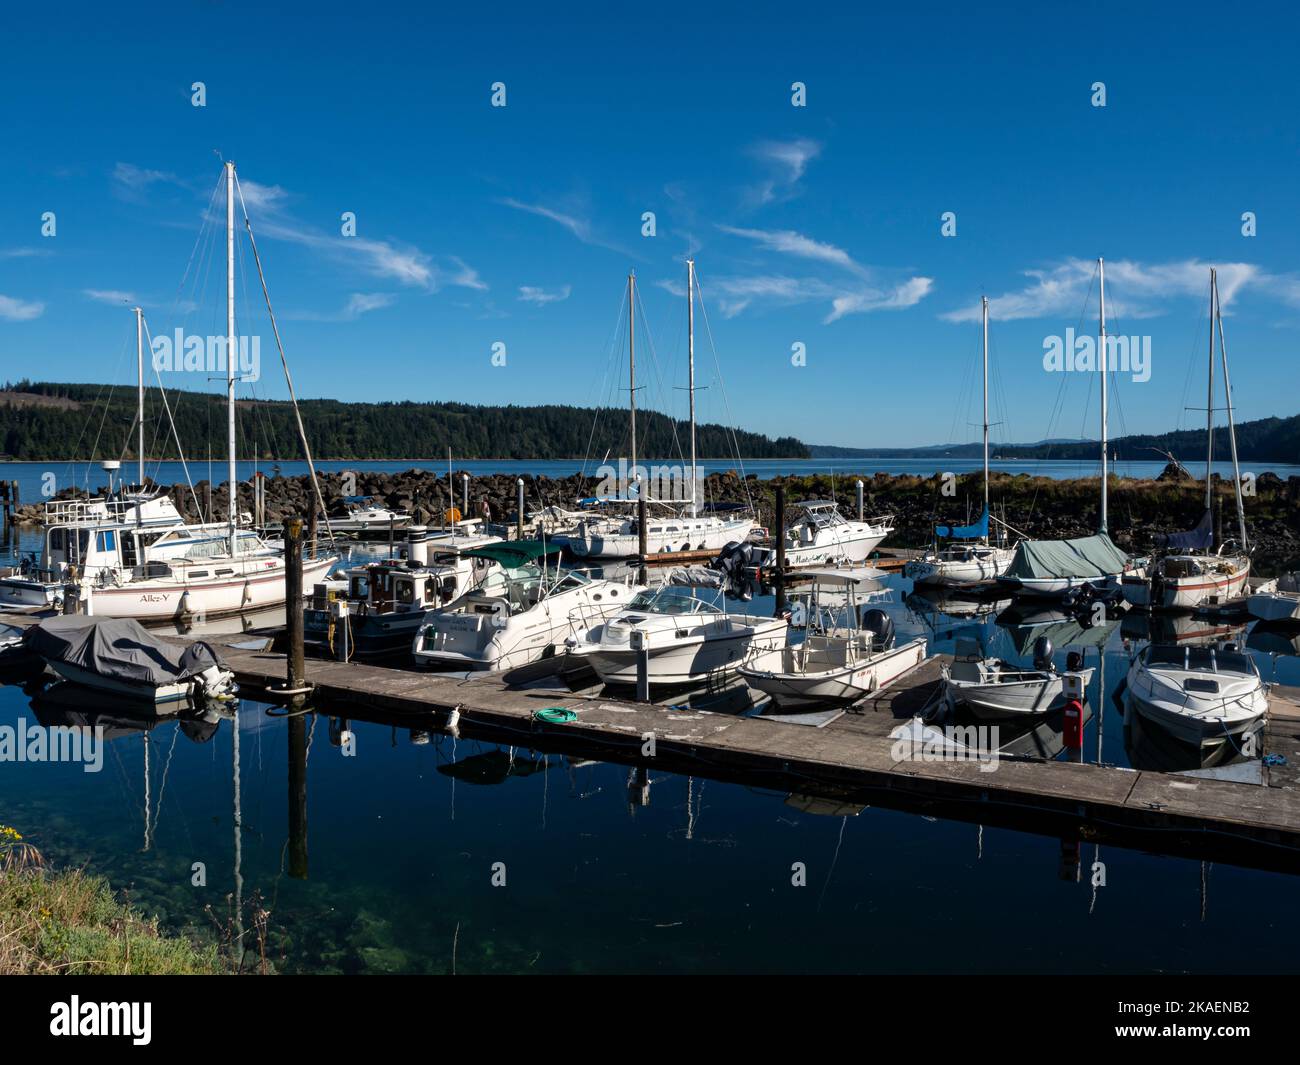 WA22659-00...WASHINGTON - Boats moored at Herb Beck Marina located off the Hood Canal on Quilcene Bay near the town of Quilcene. Stock Photo